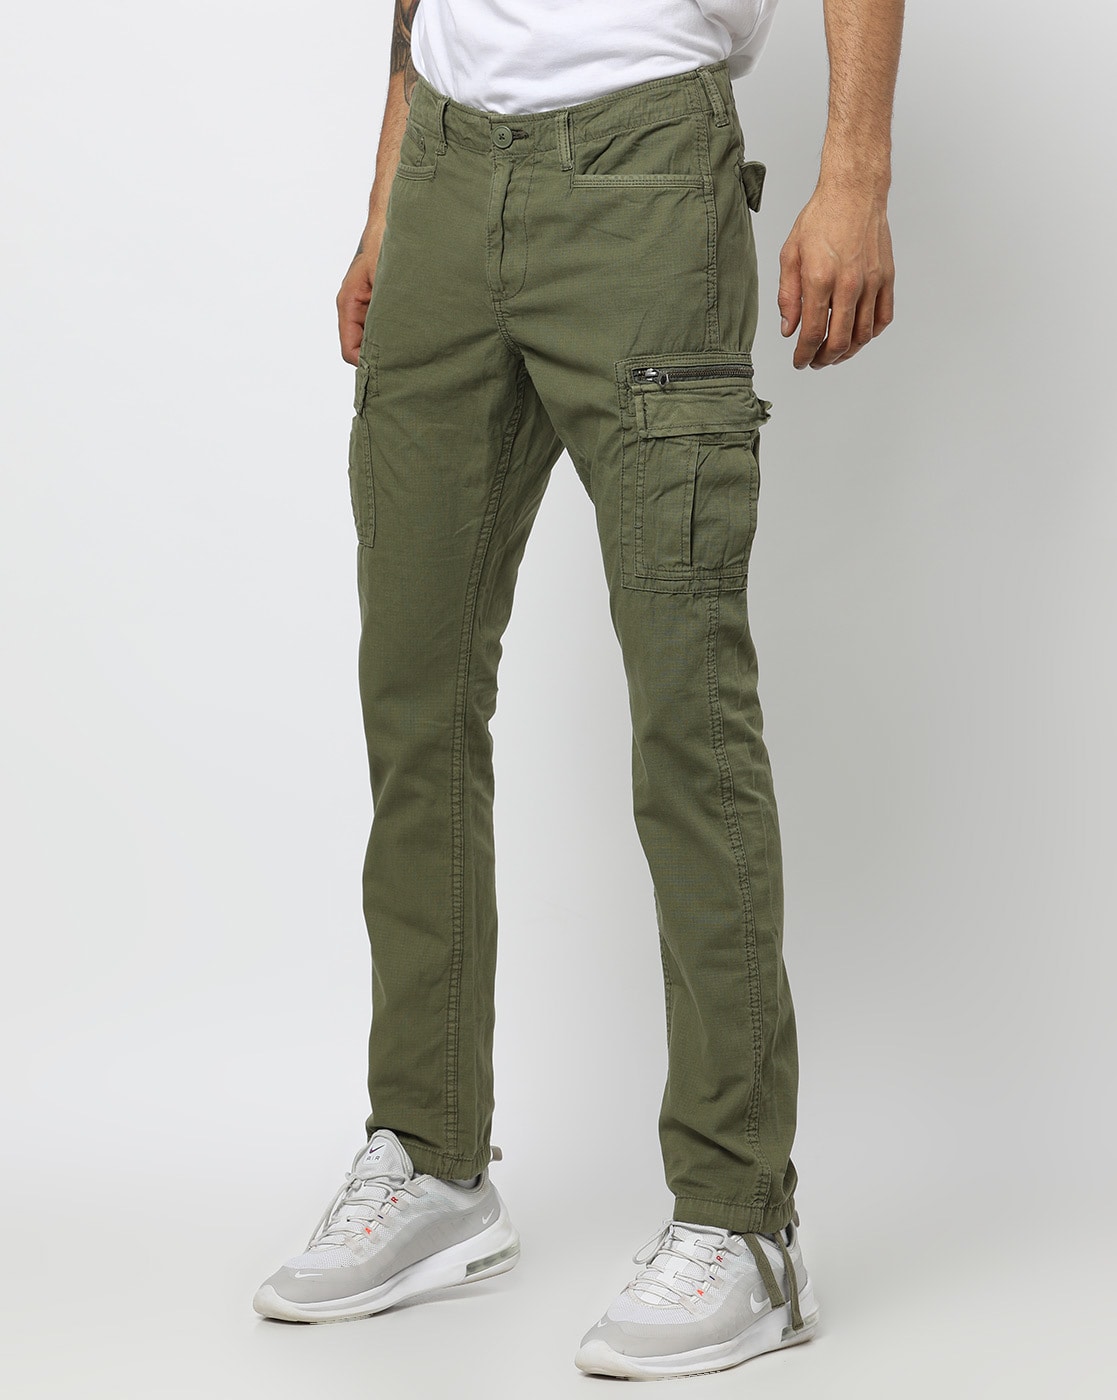 SELECTED Slim Fit Cargo Pant In Green For Men Lyst | atelier-yuwa.ciao.jp